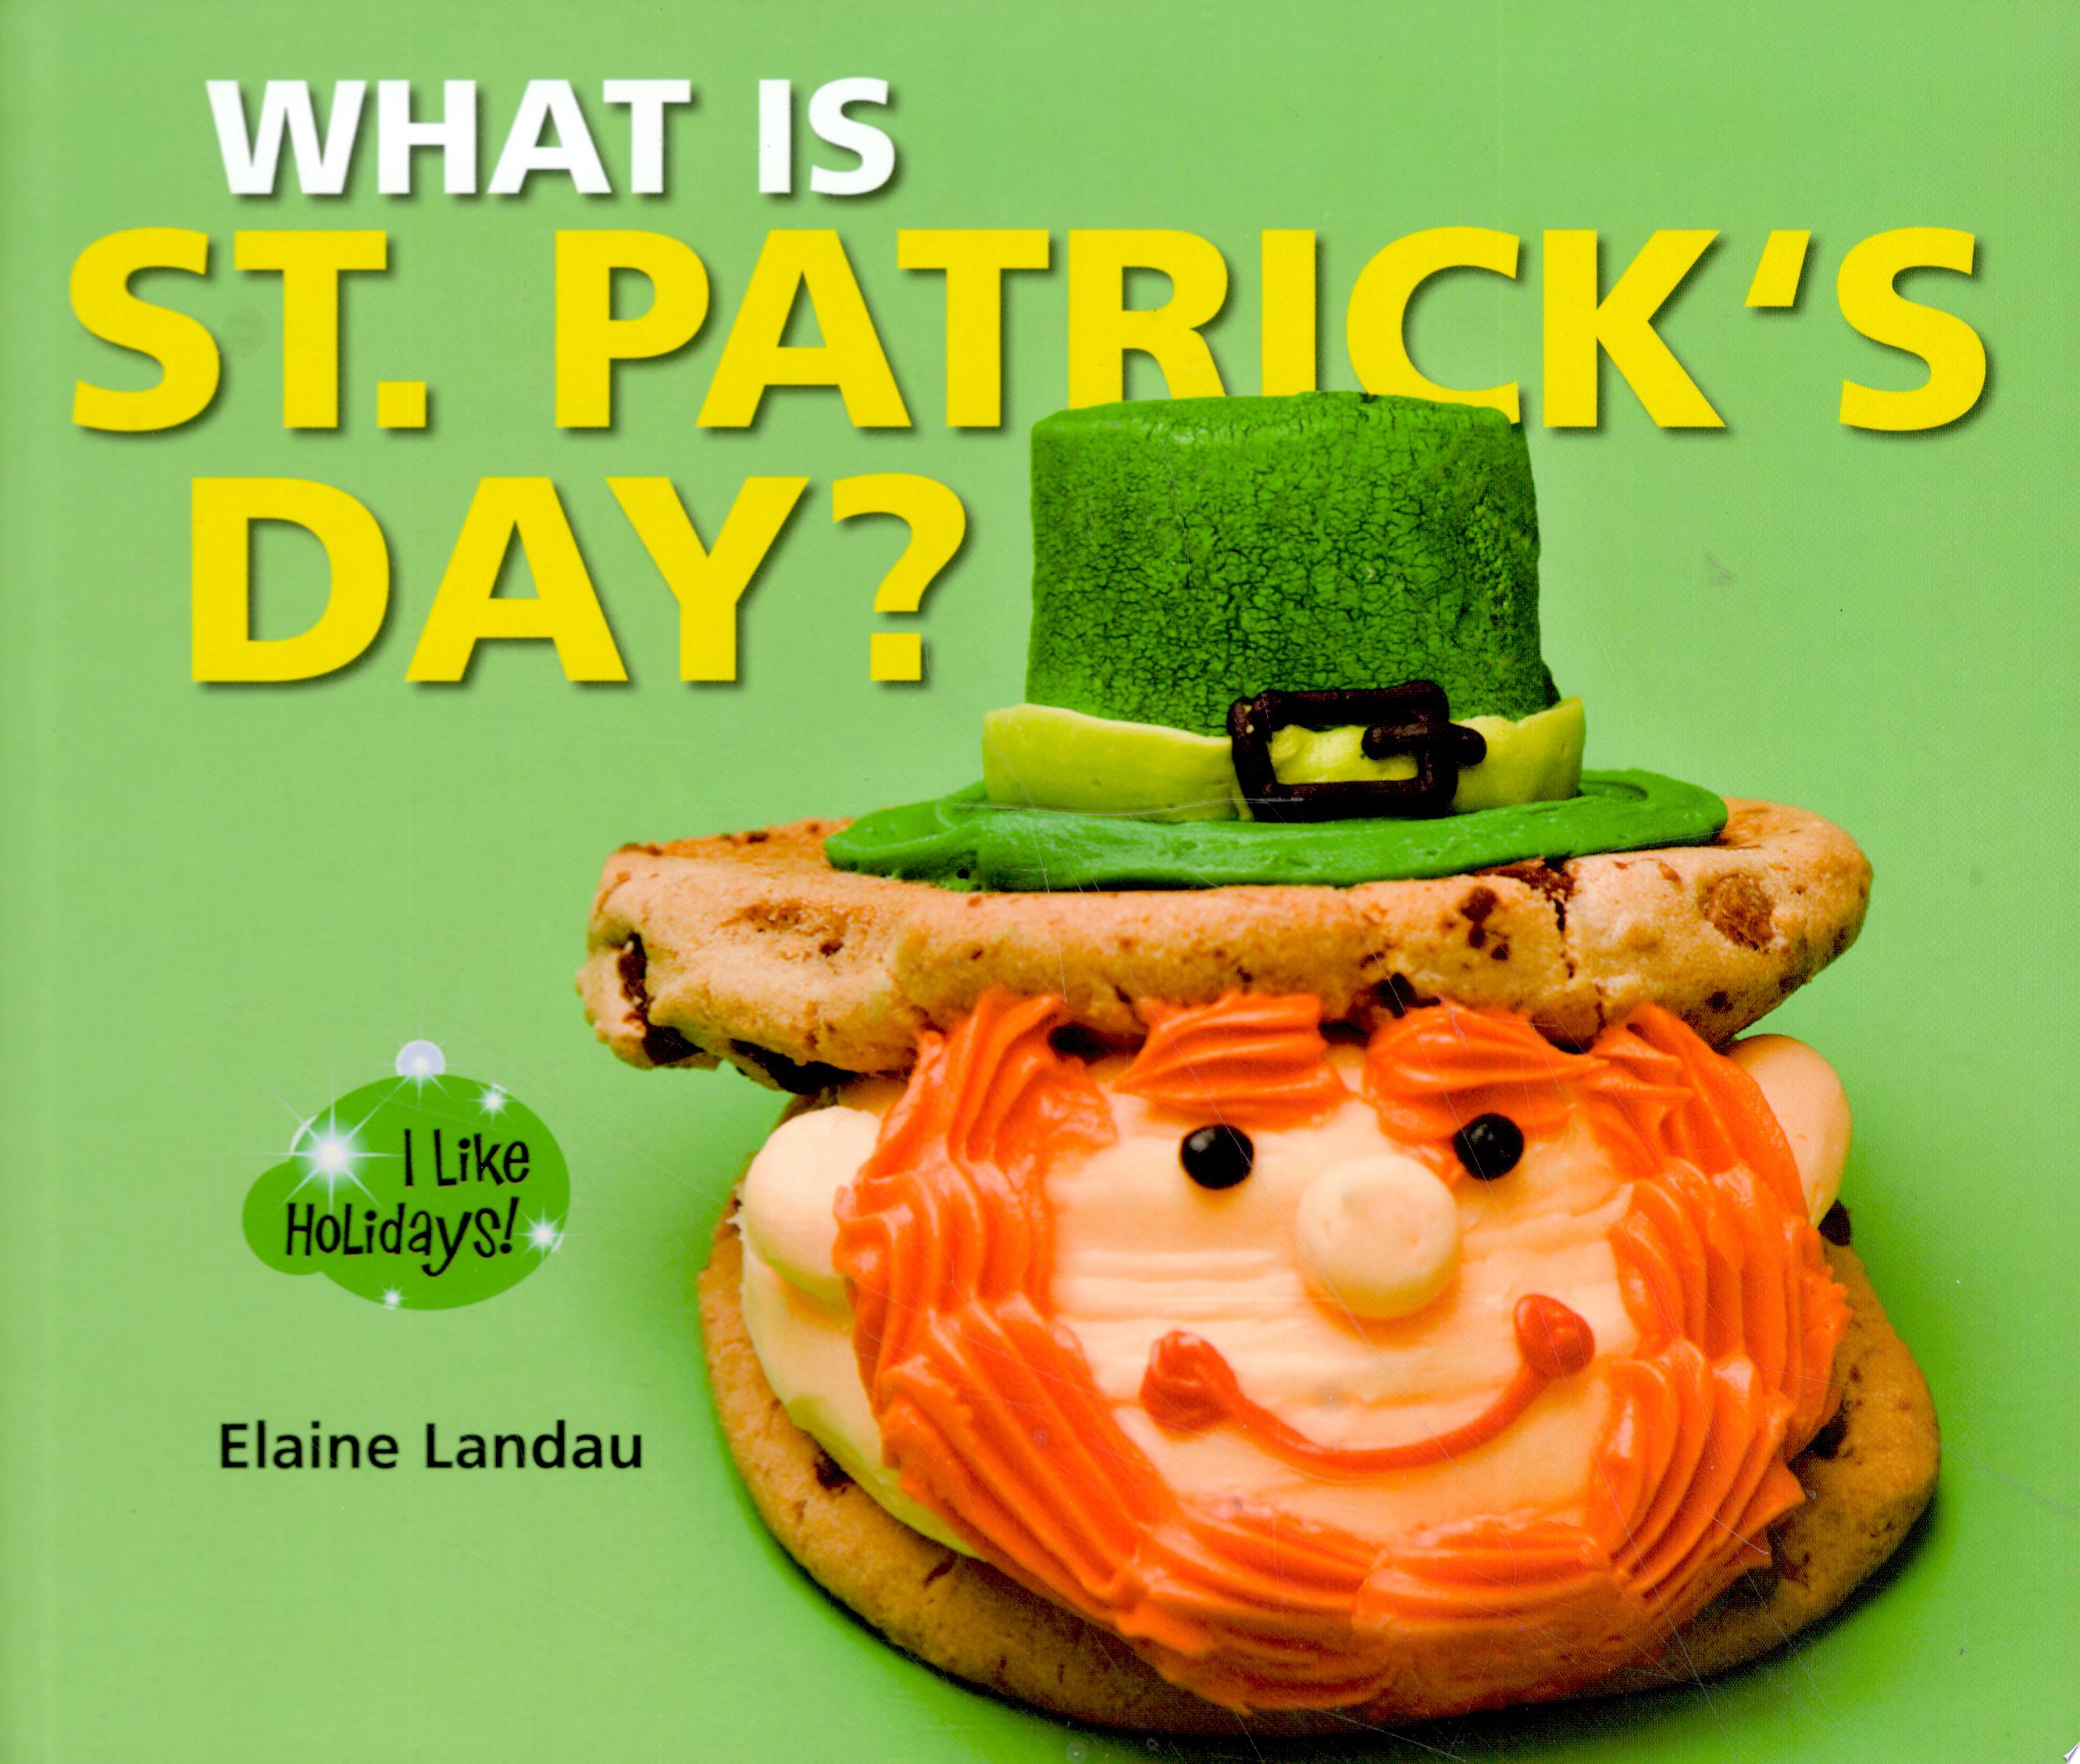 Image for "What Is St. Patrick&#039;s Day?"